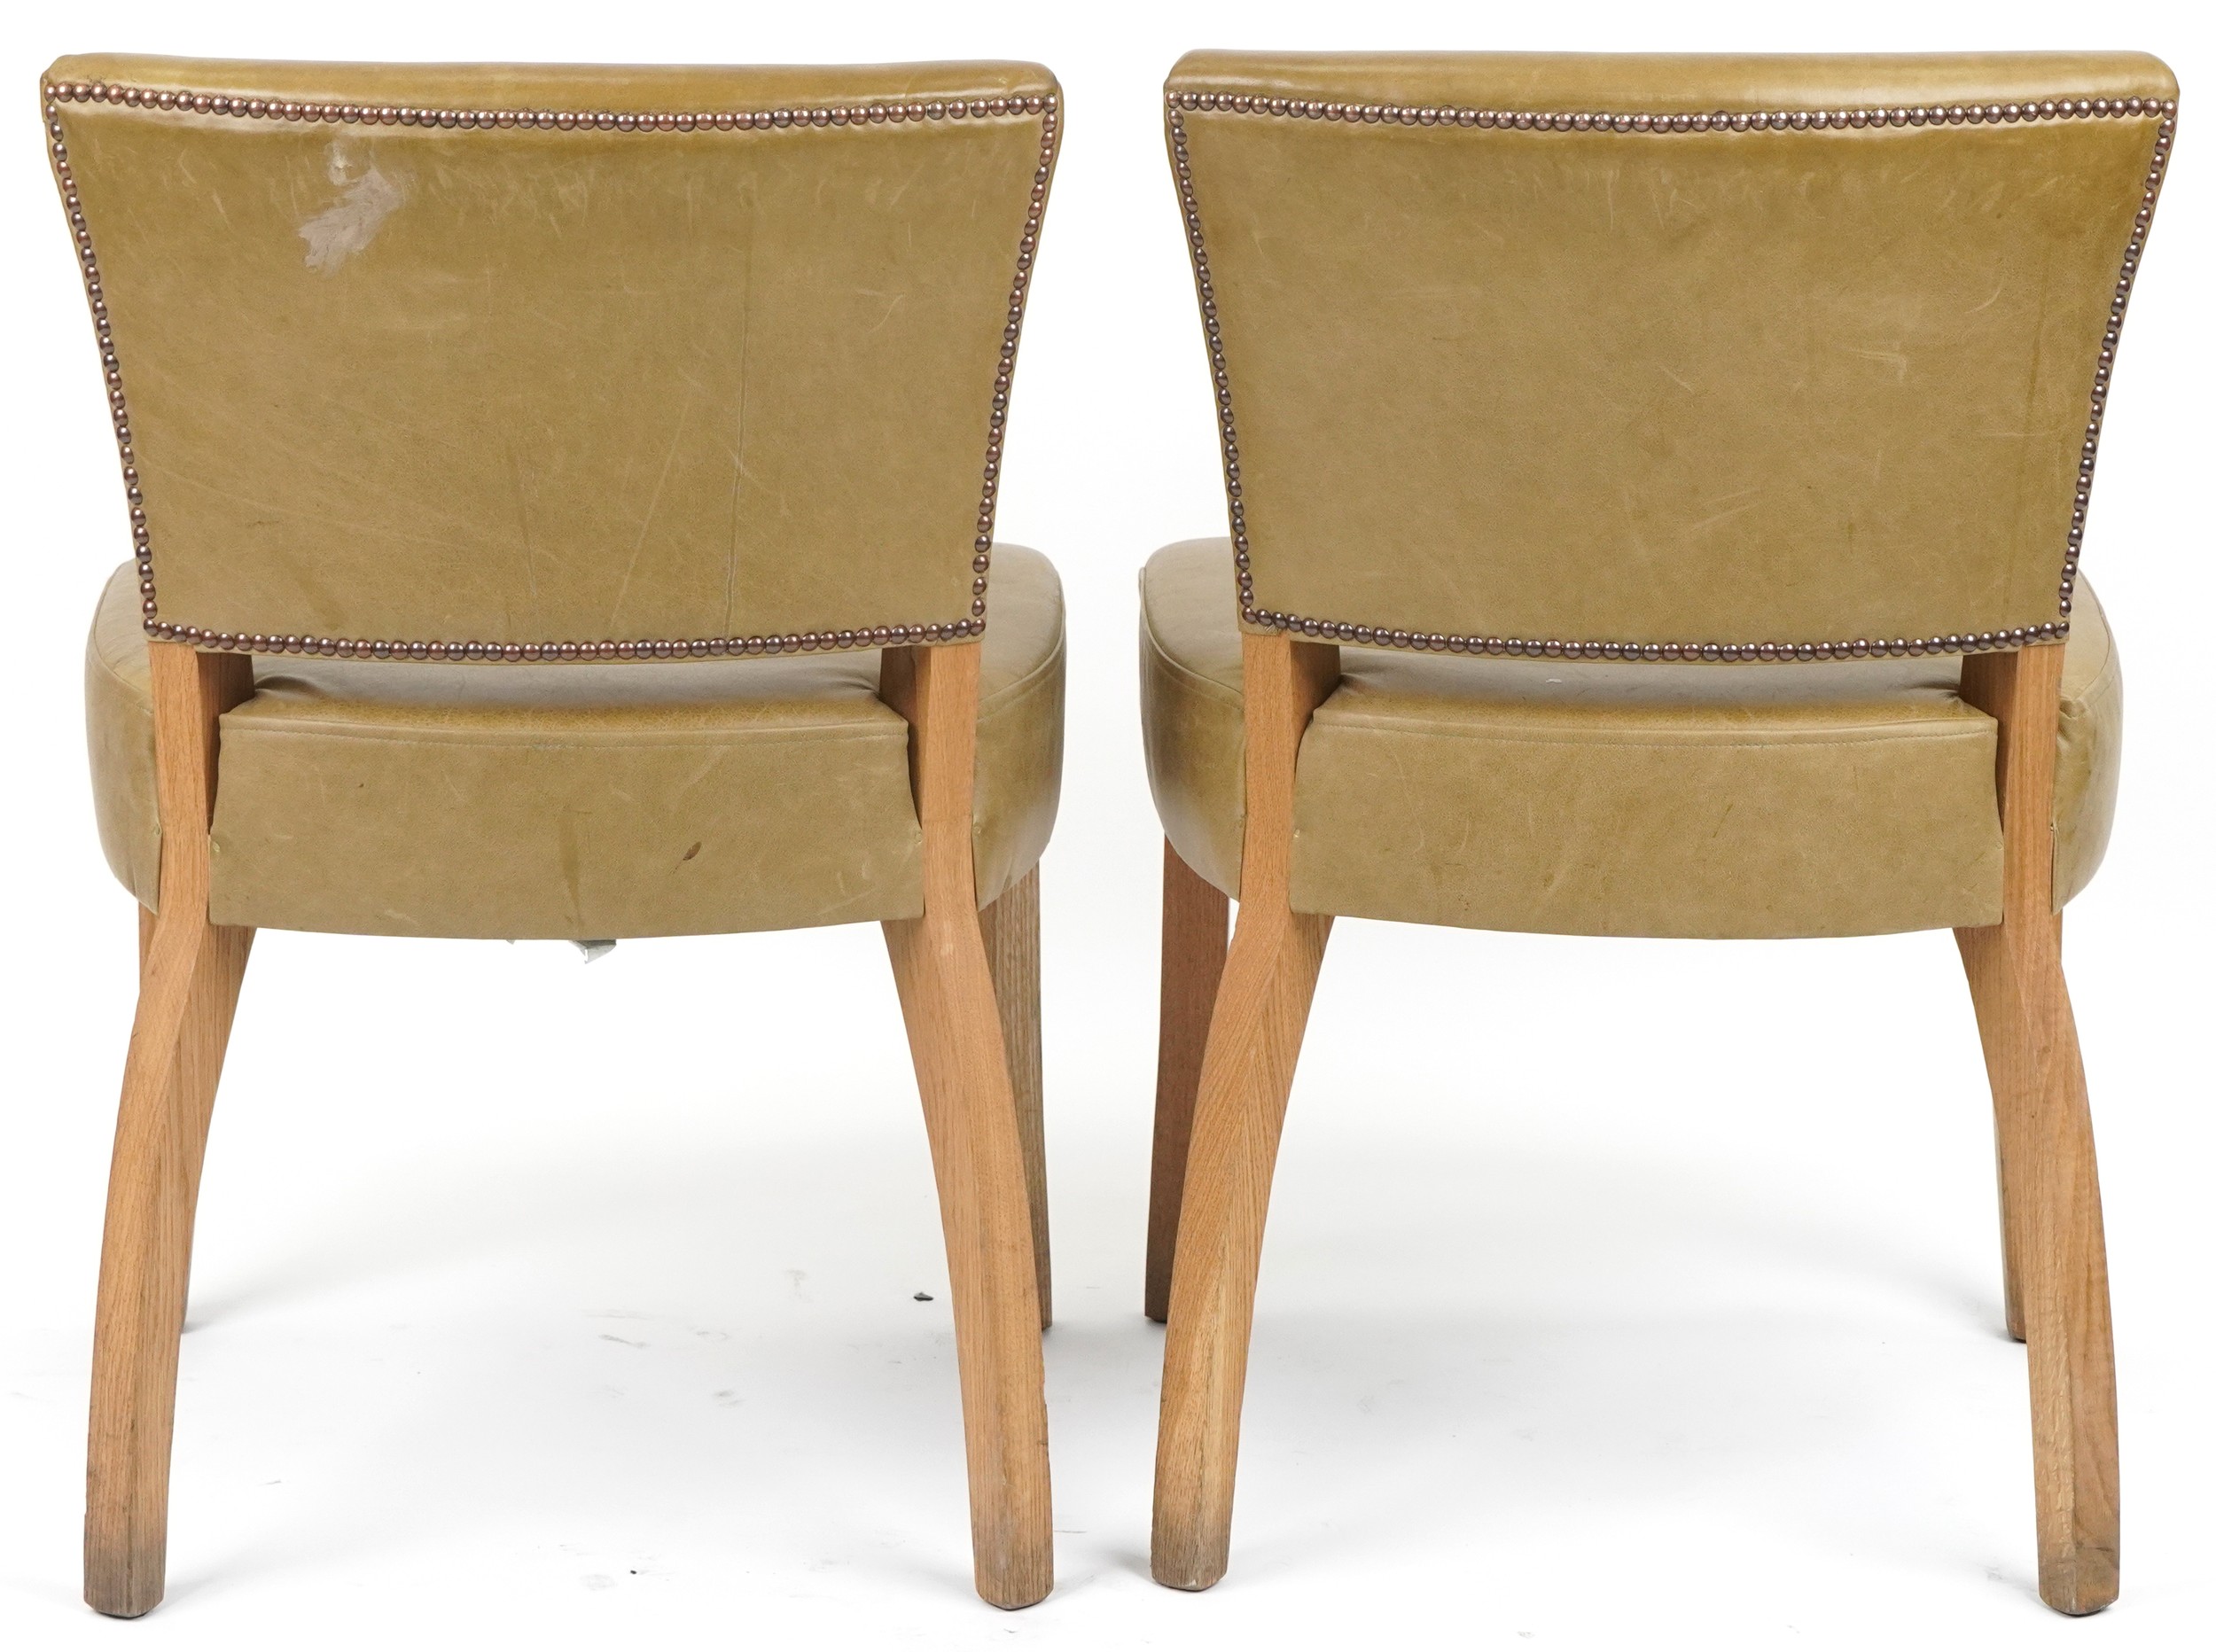 Wych Wood Design, pair of contemporary light oak chairs with green leather upholstery, 87cm high - Image 4 of 4